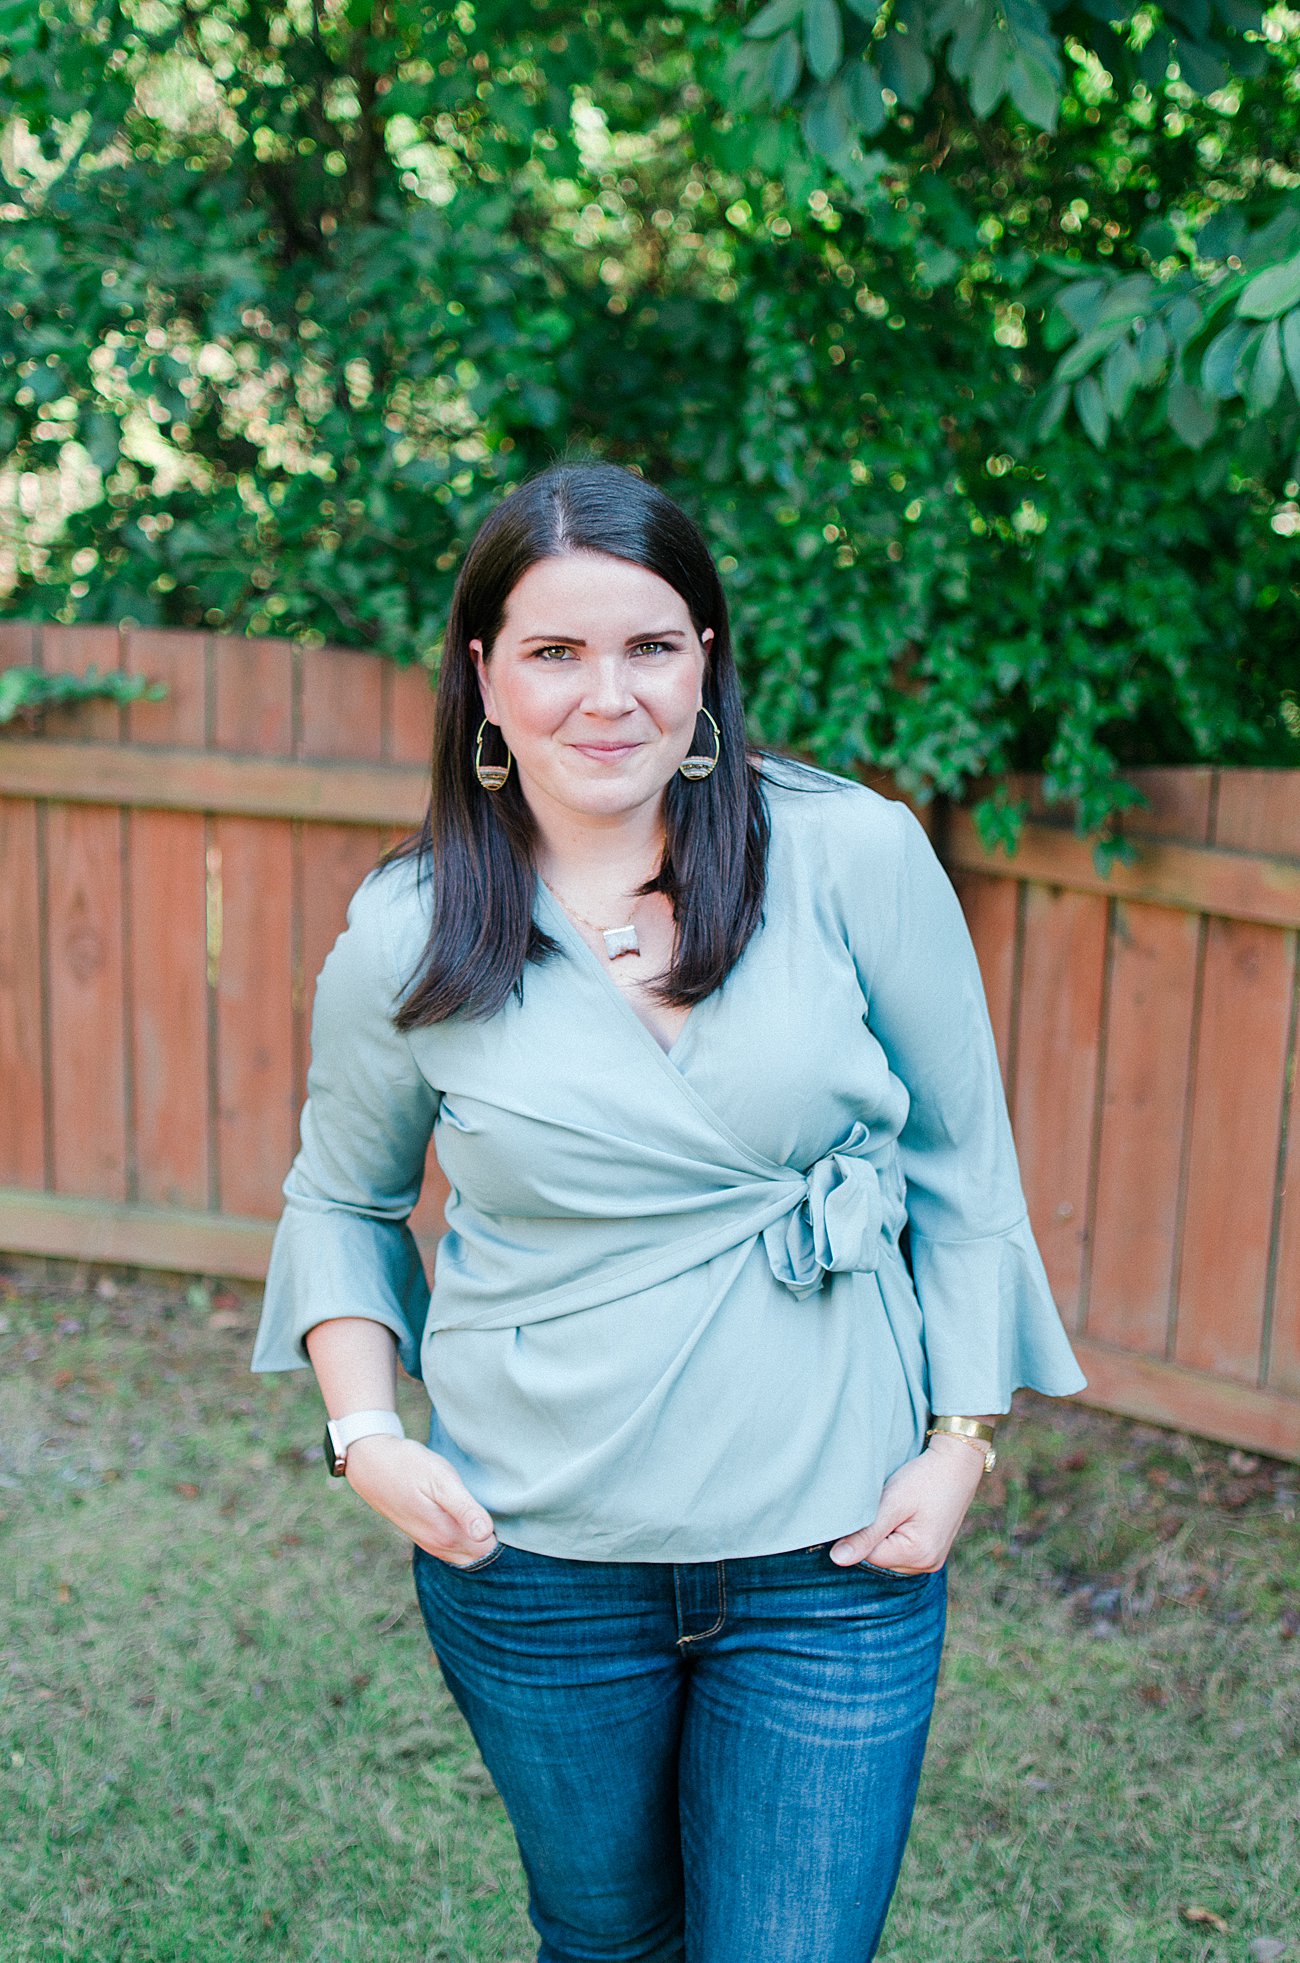 Stitch Fix En Elly - "Jilian Tie Front Top" - Size XL - $58 - Stitch Fix Review #46 by NC fashion blogger Still Being Molly